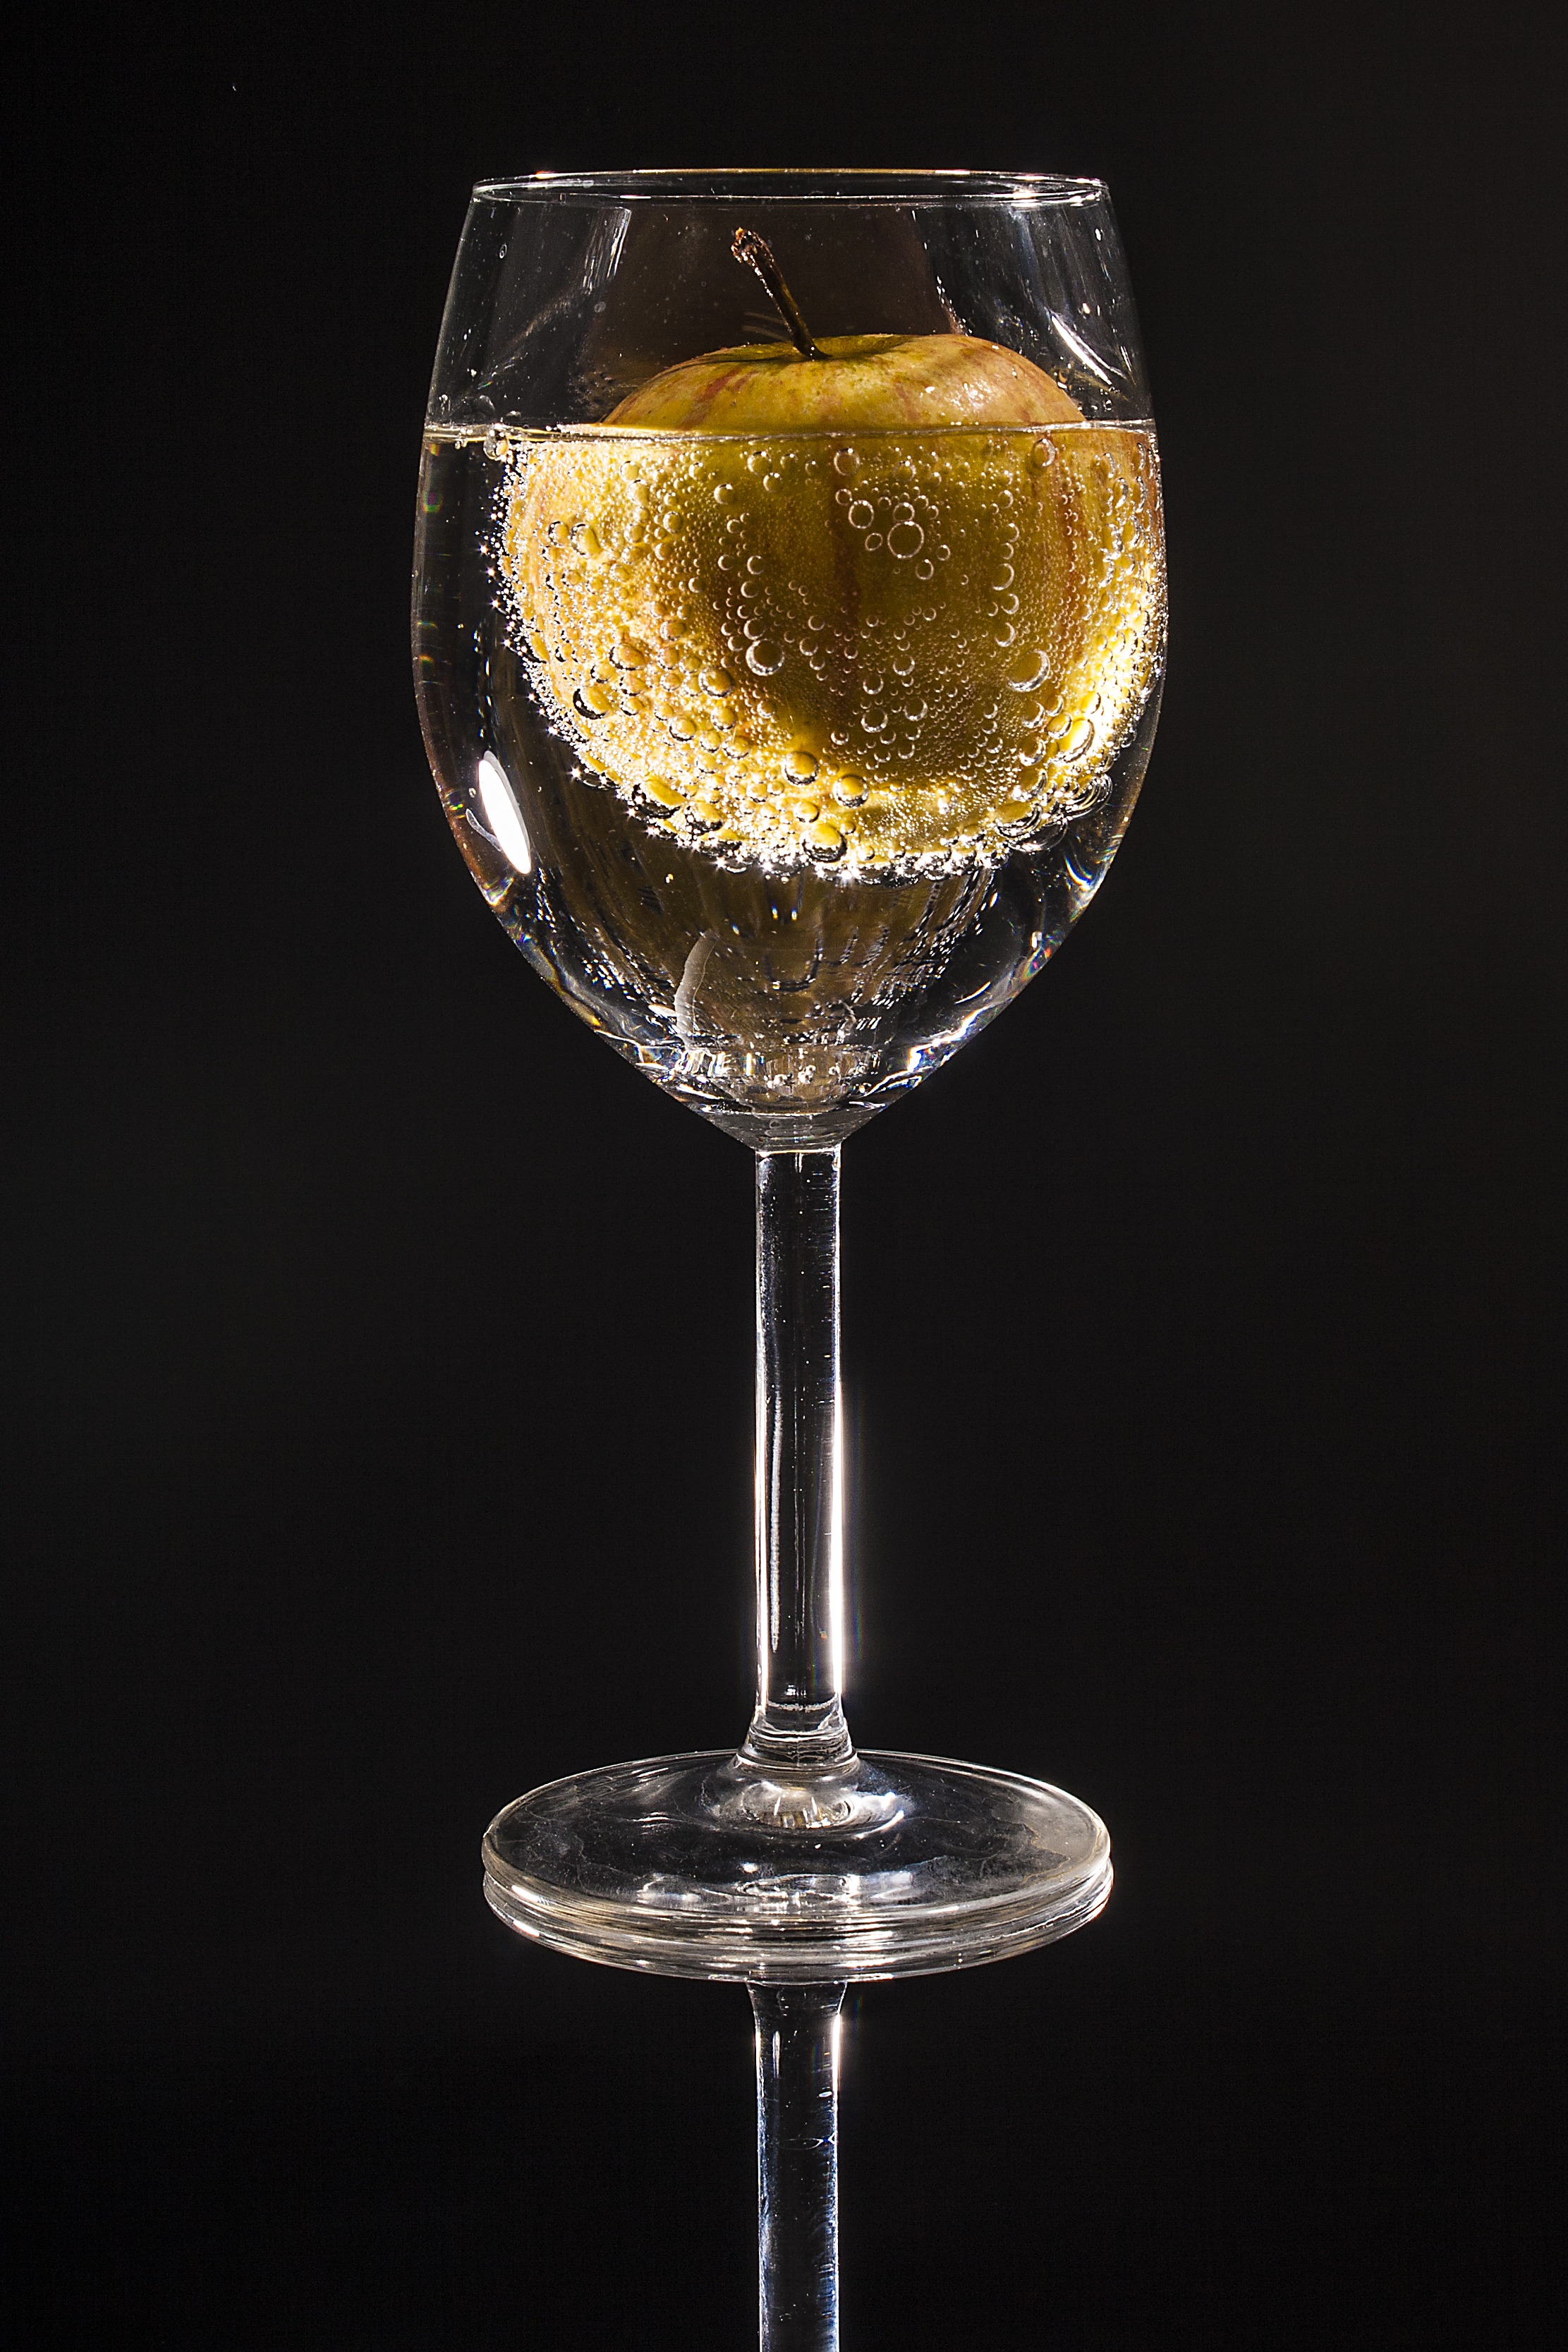 Free photo Image of an apple in a champagne glass